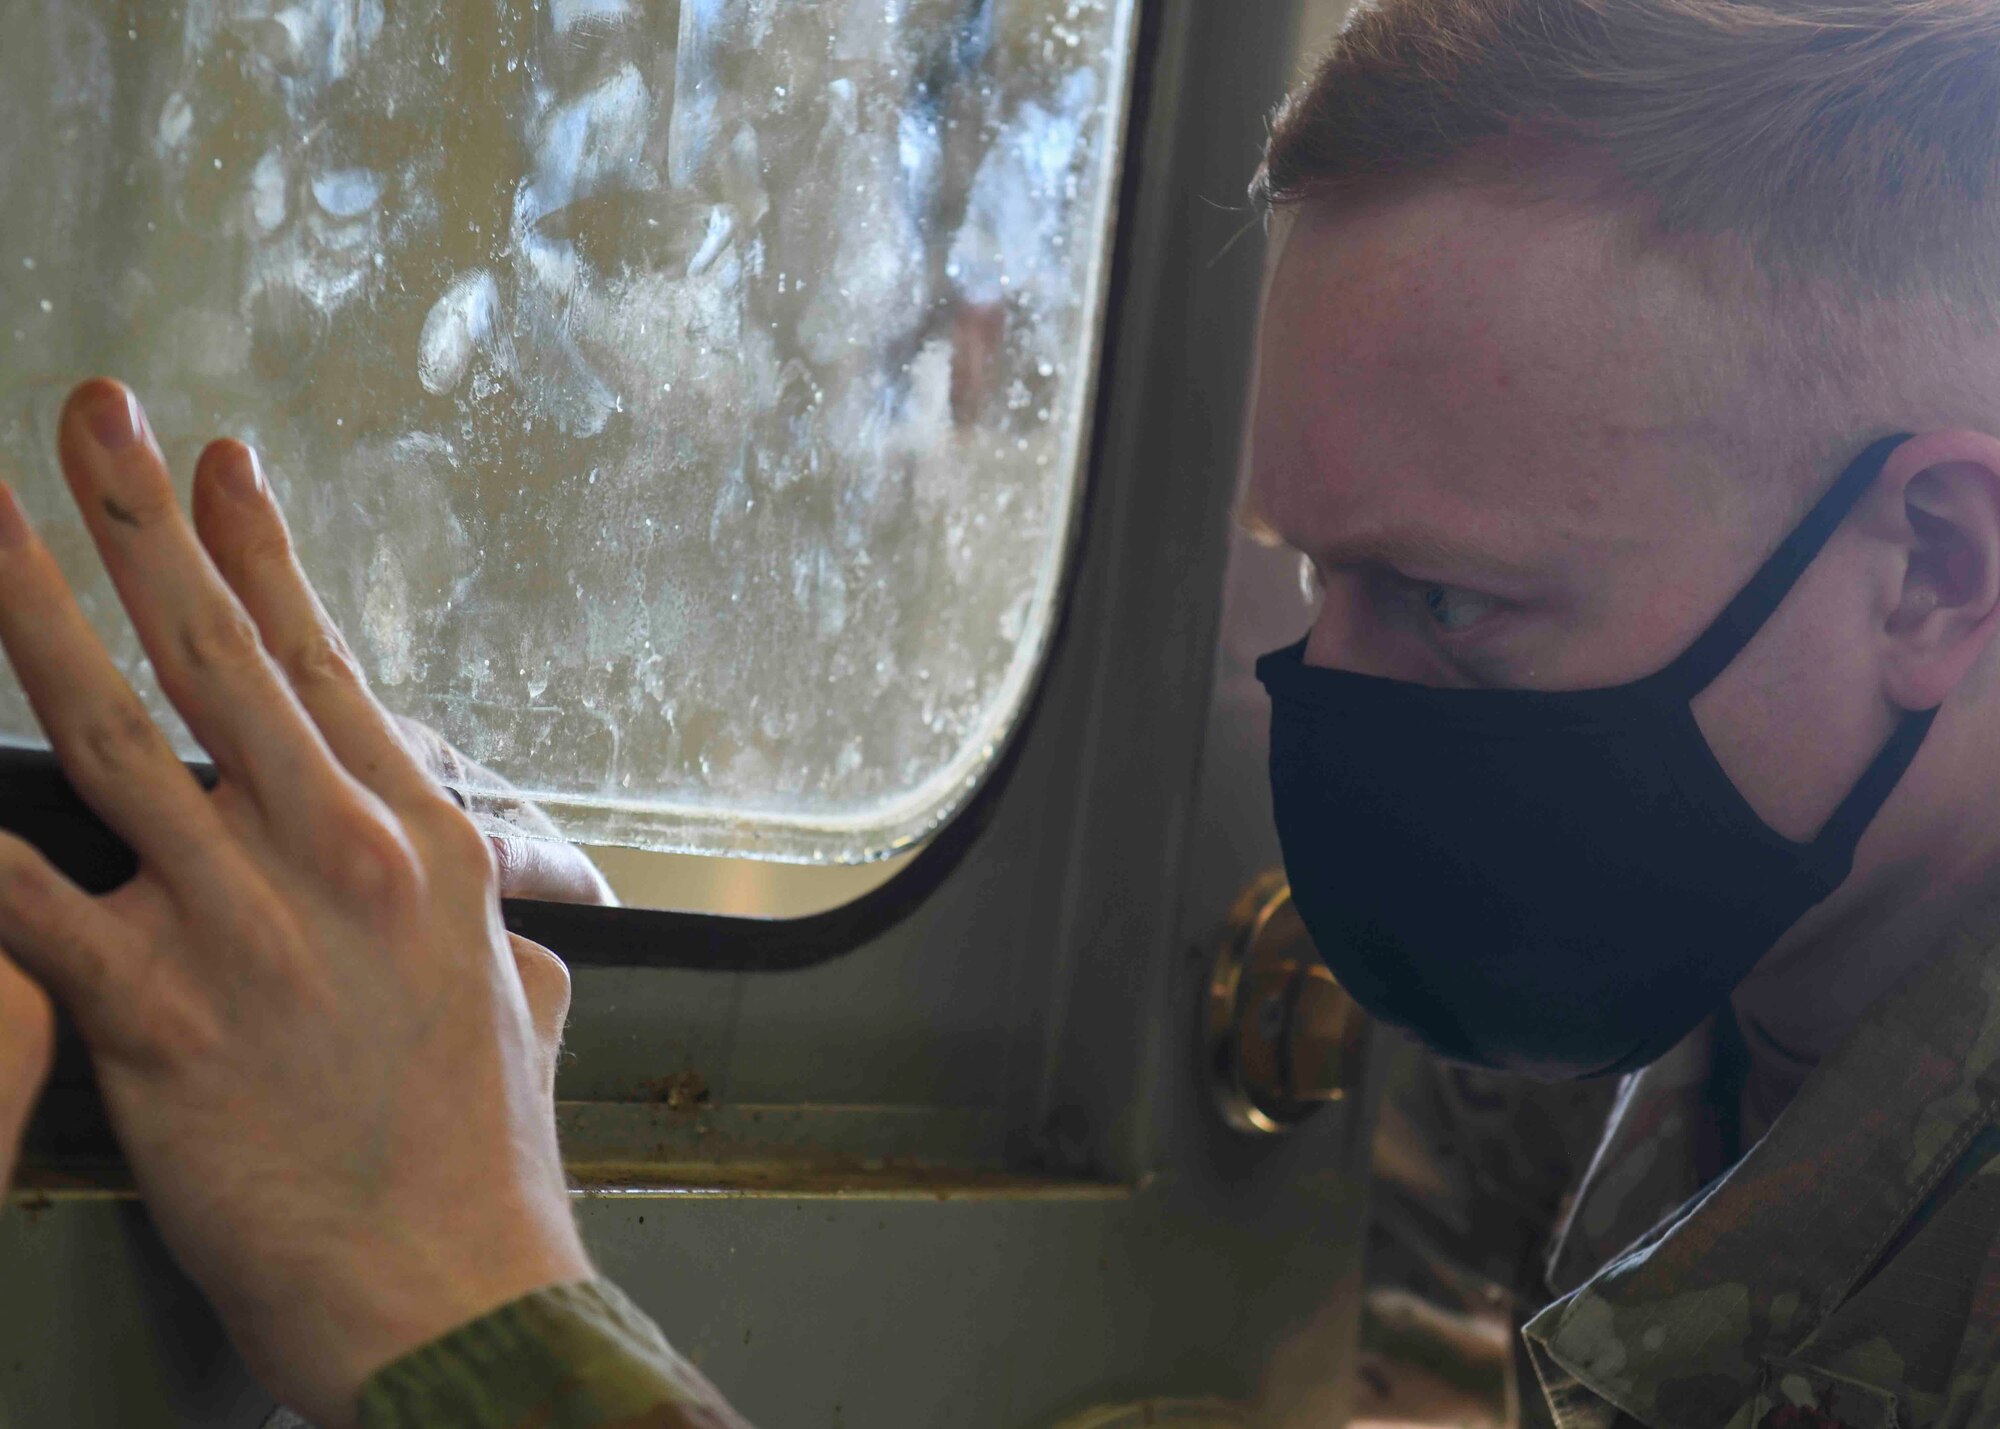 Staff Sgt. Alexander Tallant, 92nd Maintenance Squadron aircraft structural maintenance craftsman, adjusts a window on a railcar simulator on Fairchild Air Force Base, Washington, April 16, 2021. Tallant and Tech Sgt. Brian Stolz, 92nd MXS aircraft structural maintenance craftsman, visit the airpark once a month to ensure the aircraft and structures are safe. (U.S. Air Force photo by Airman 1st Class Kiaundra Miller)